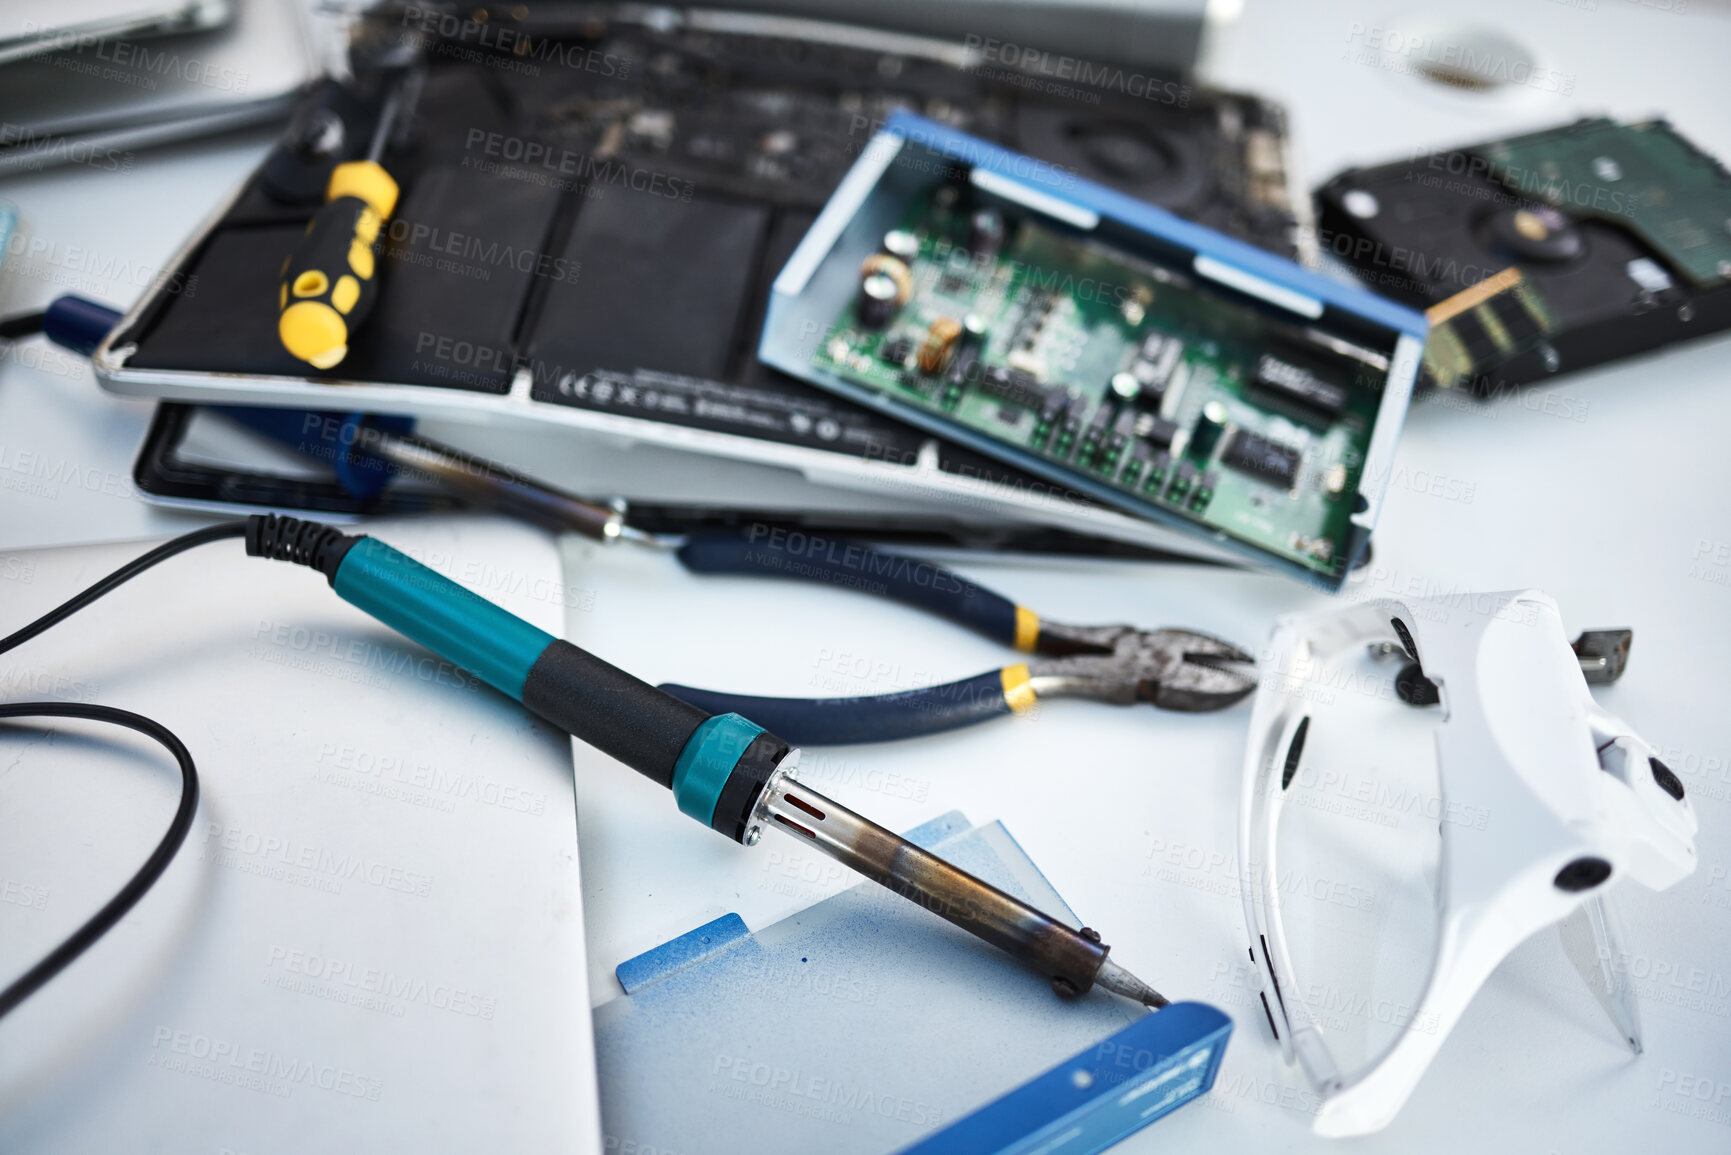 Buy stock photo Tools, computer hardware and equipment in the office for tech repairs, maintenance or upgrade. Database, technology and supplies for electric board servers on a desk in the it industry workplace.